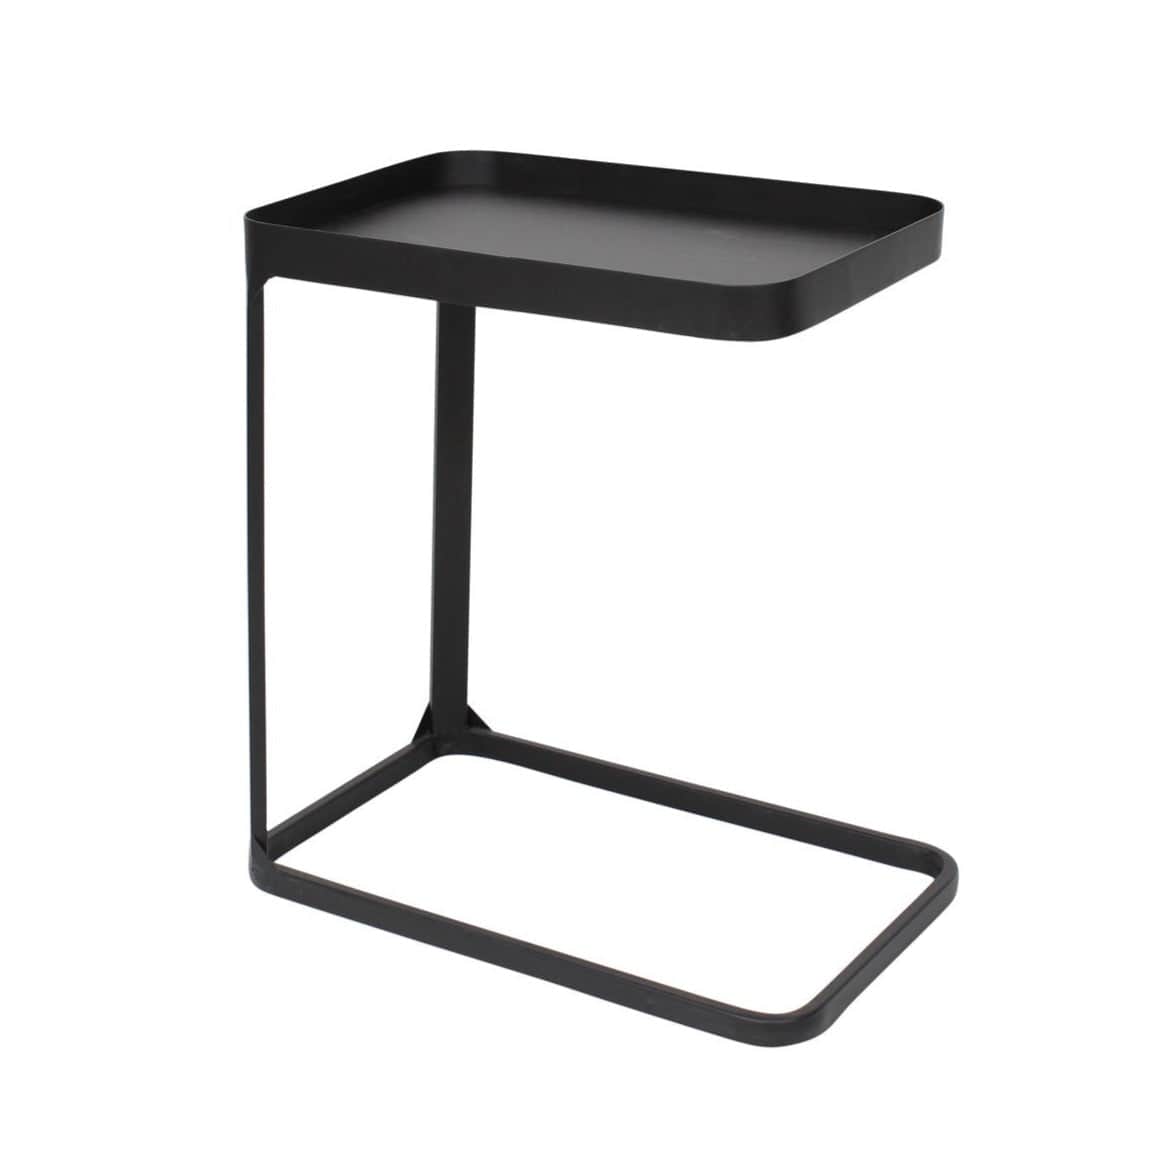 Black metal side table for your sofa.